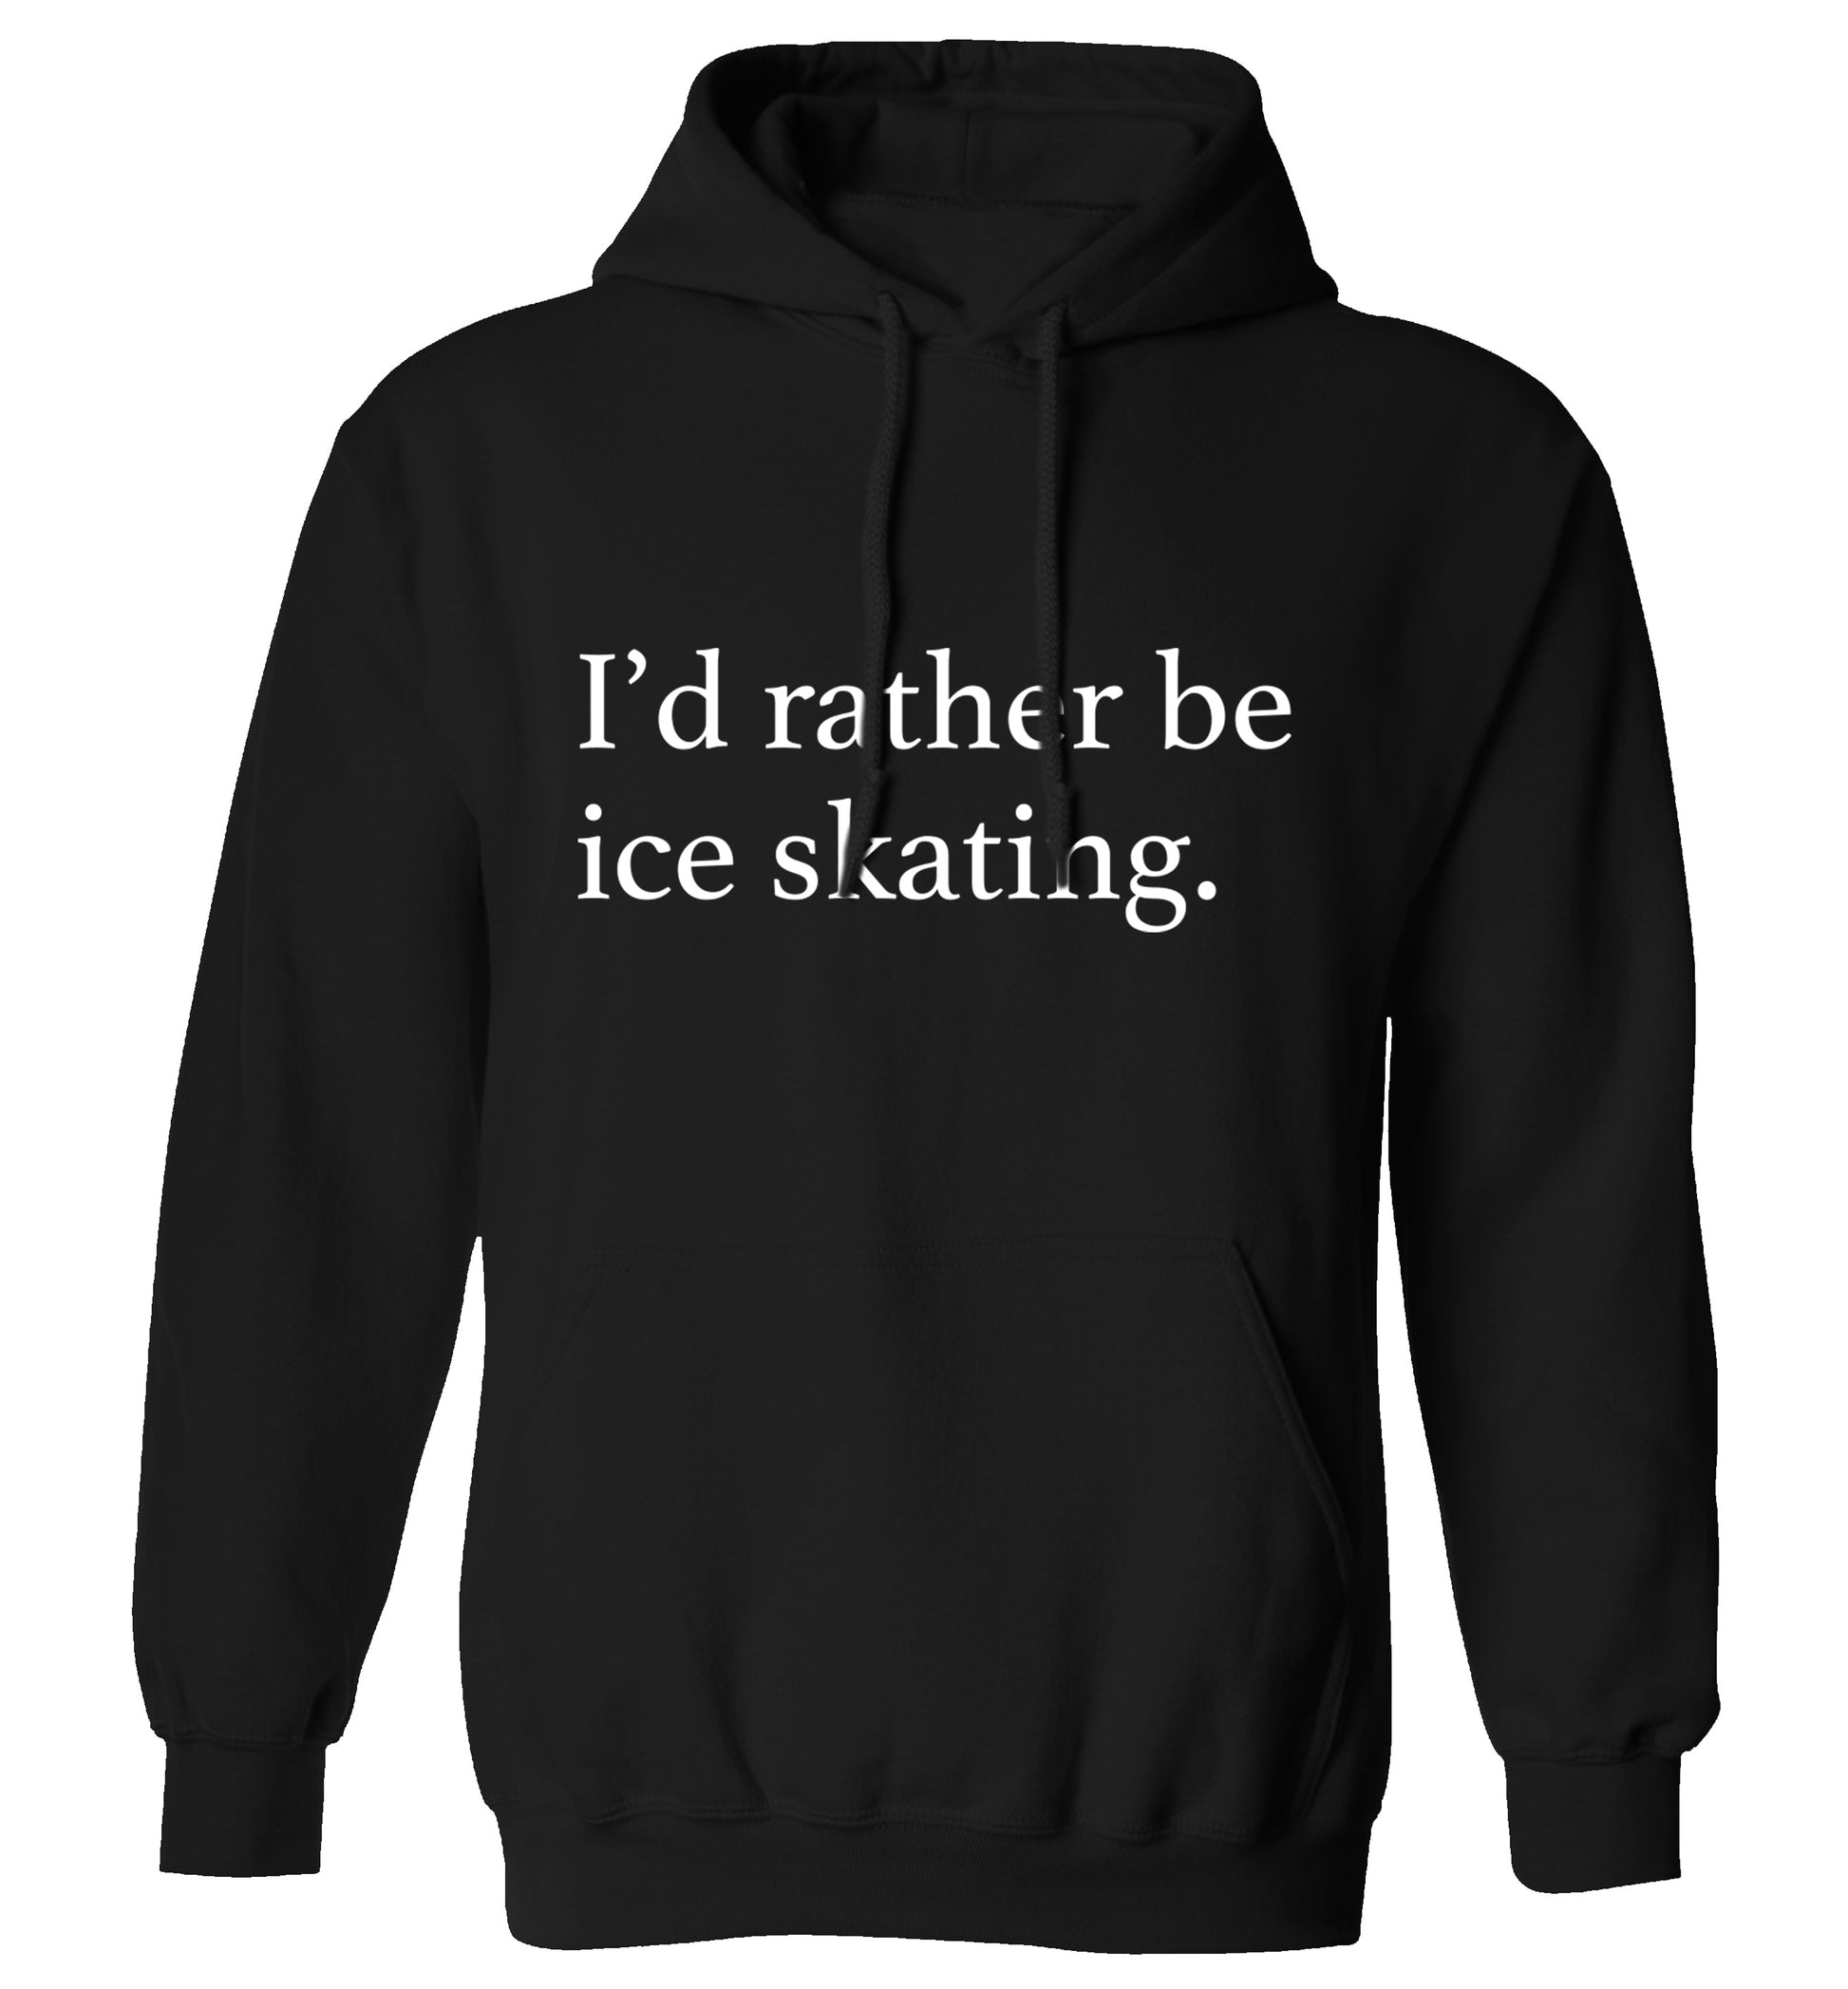 I'd rather be ice skating adults unisexblack hoodie 2XL